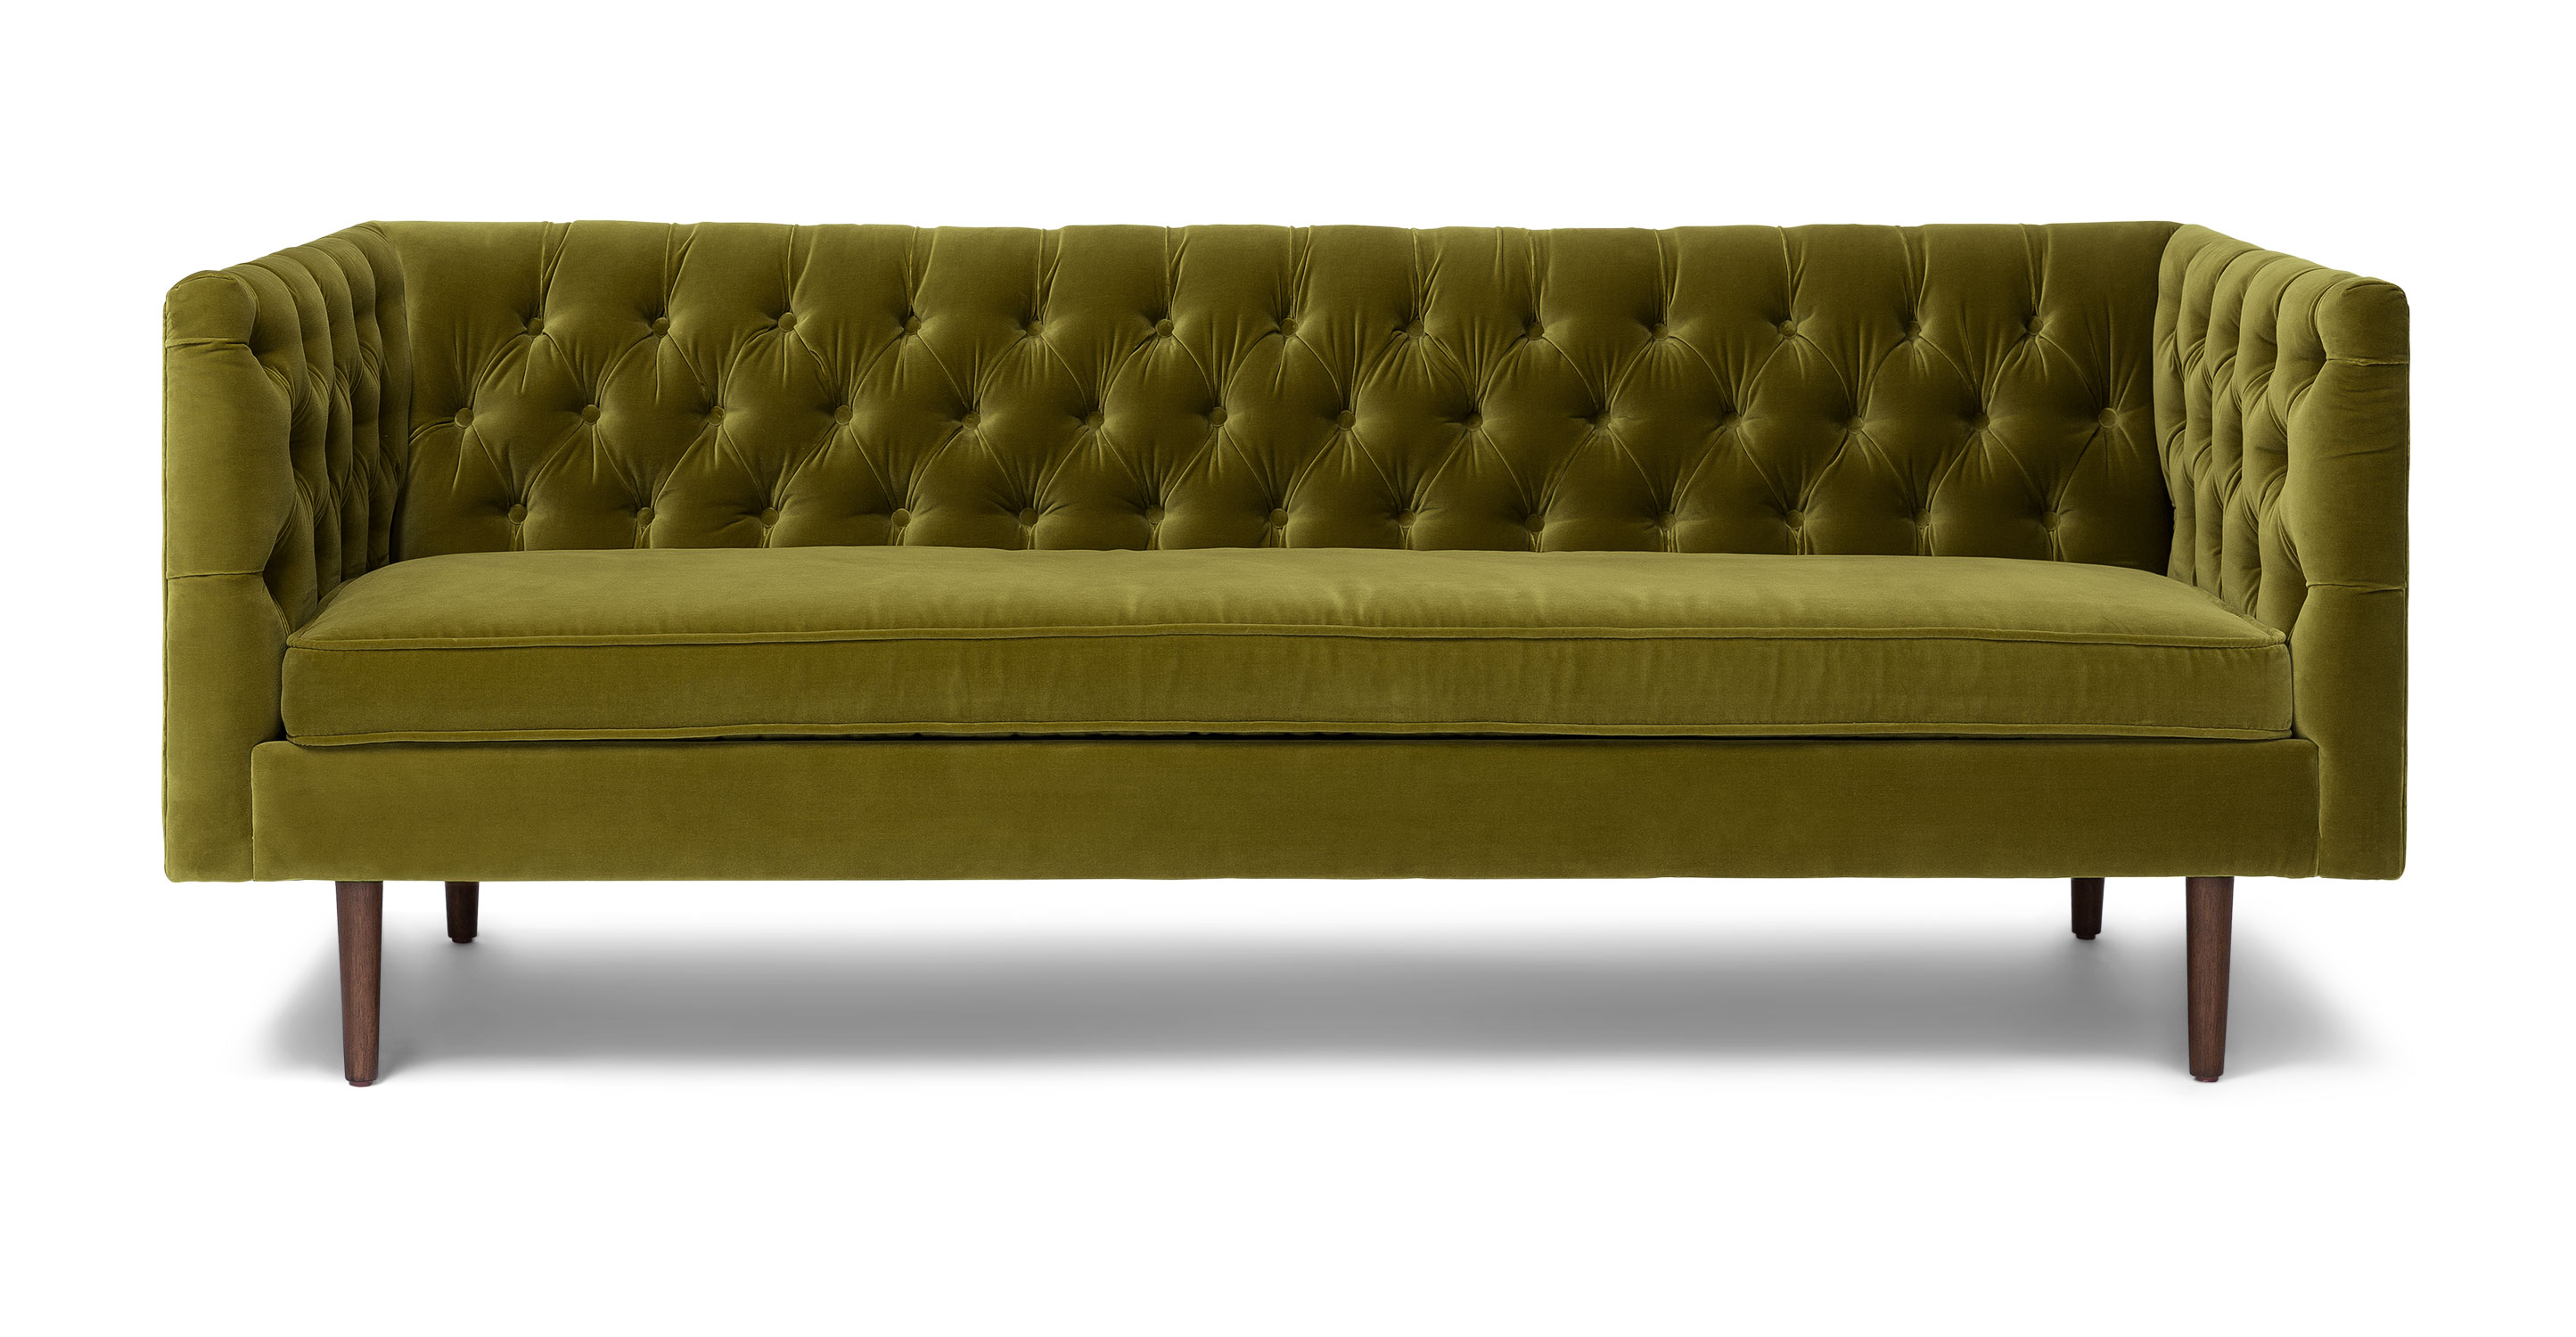 olive oil stain on leather sofa